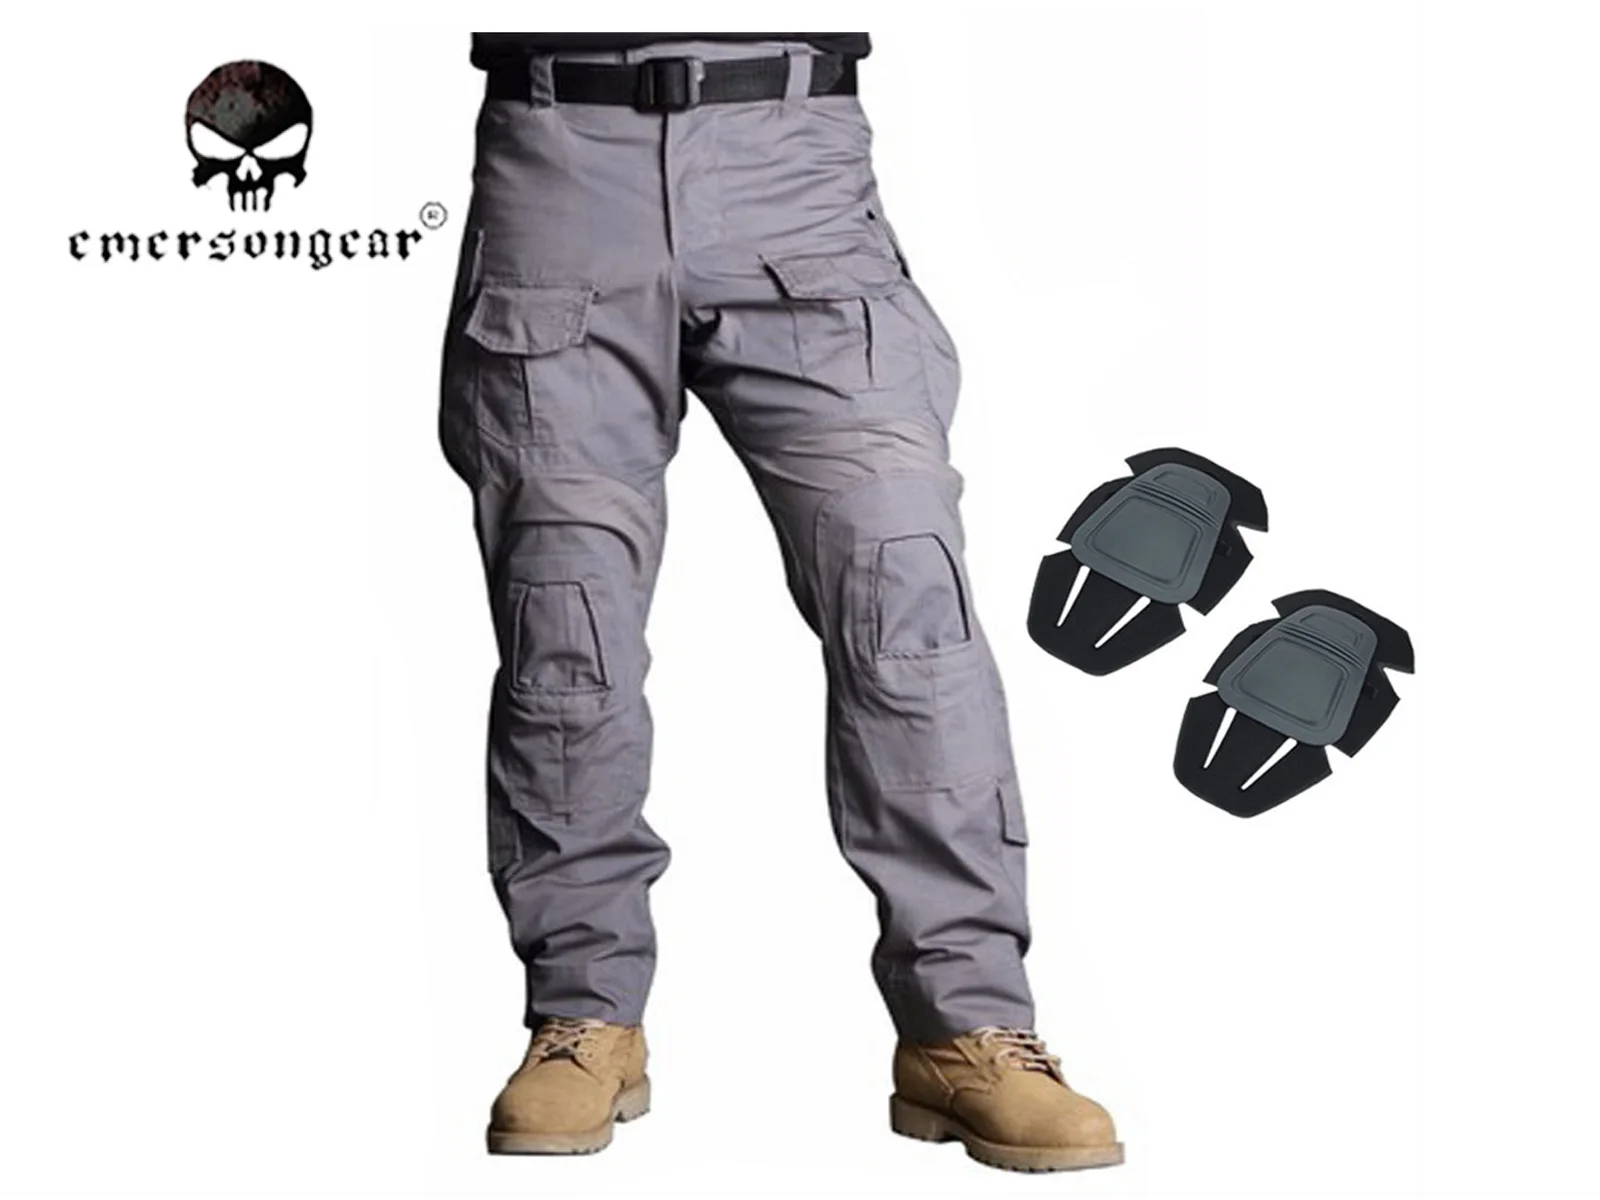 EmersonGear G3 Tactical Pants Combat Army Military bdu Pants Wolf Gray EM9294